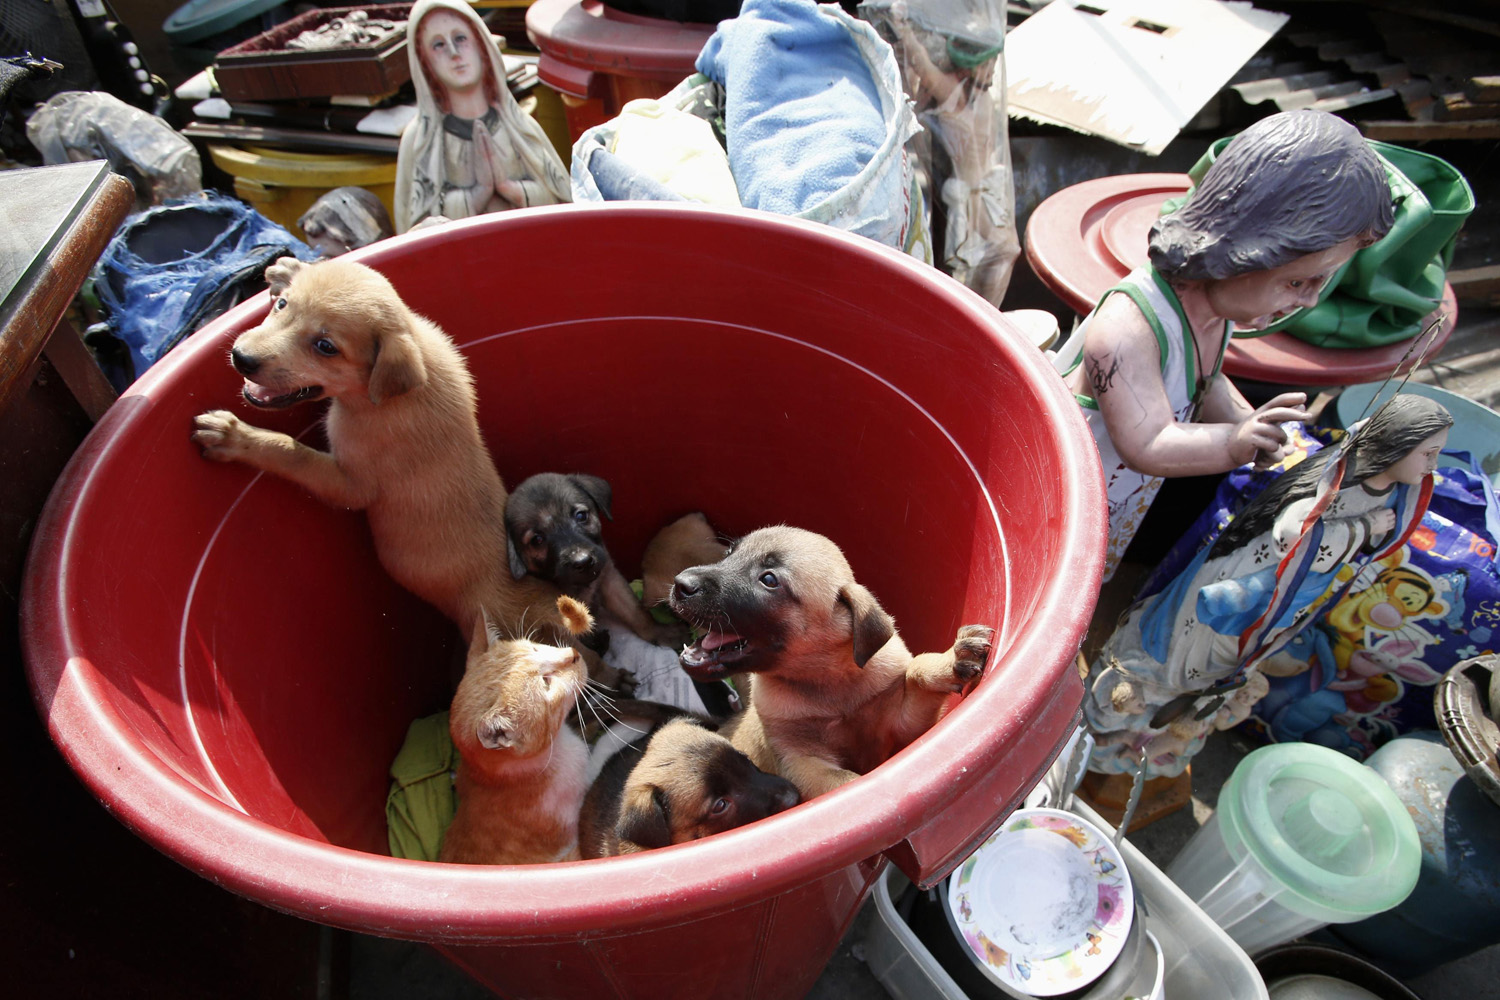 A slum dweller's pets, including puppies and a cat, look on from a plastic container next to religious statues and other belongings, after a squatter colony was demolished in Tondo, Manila